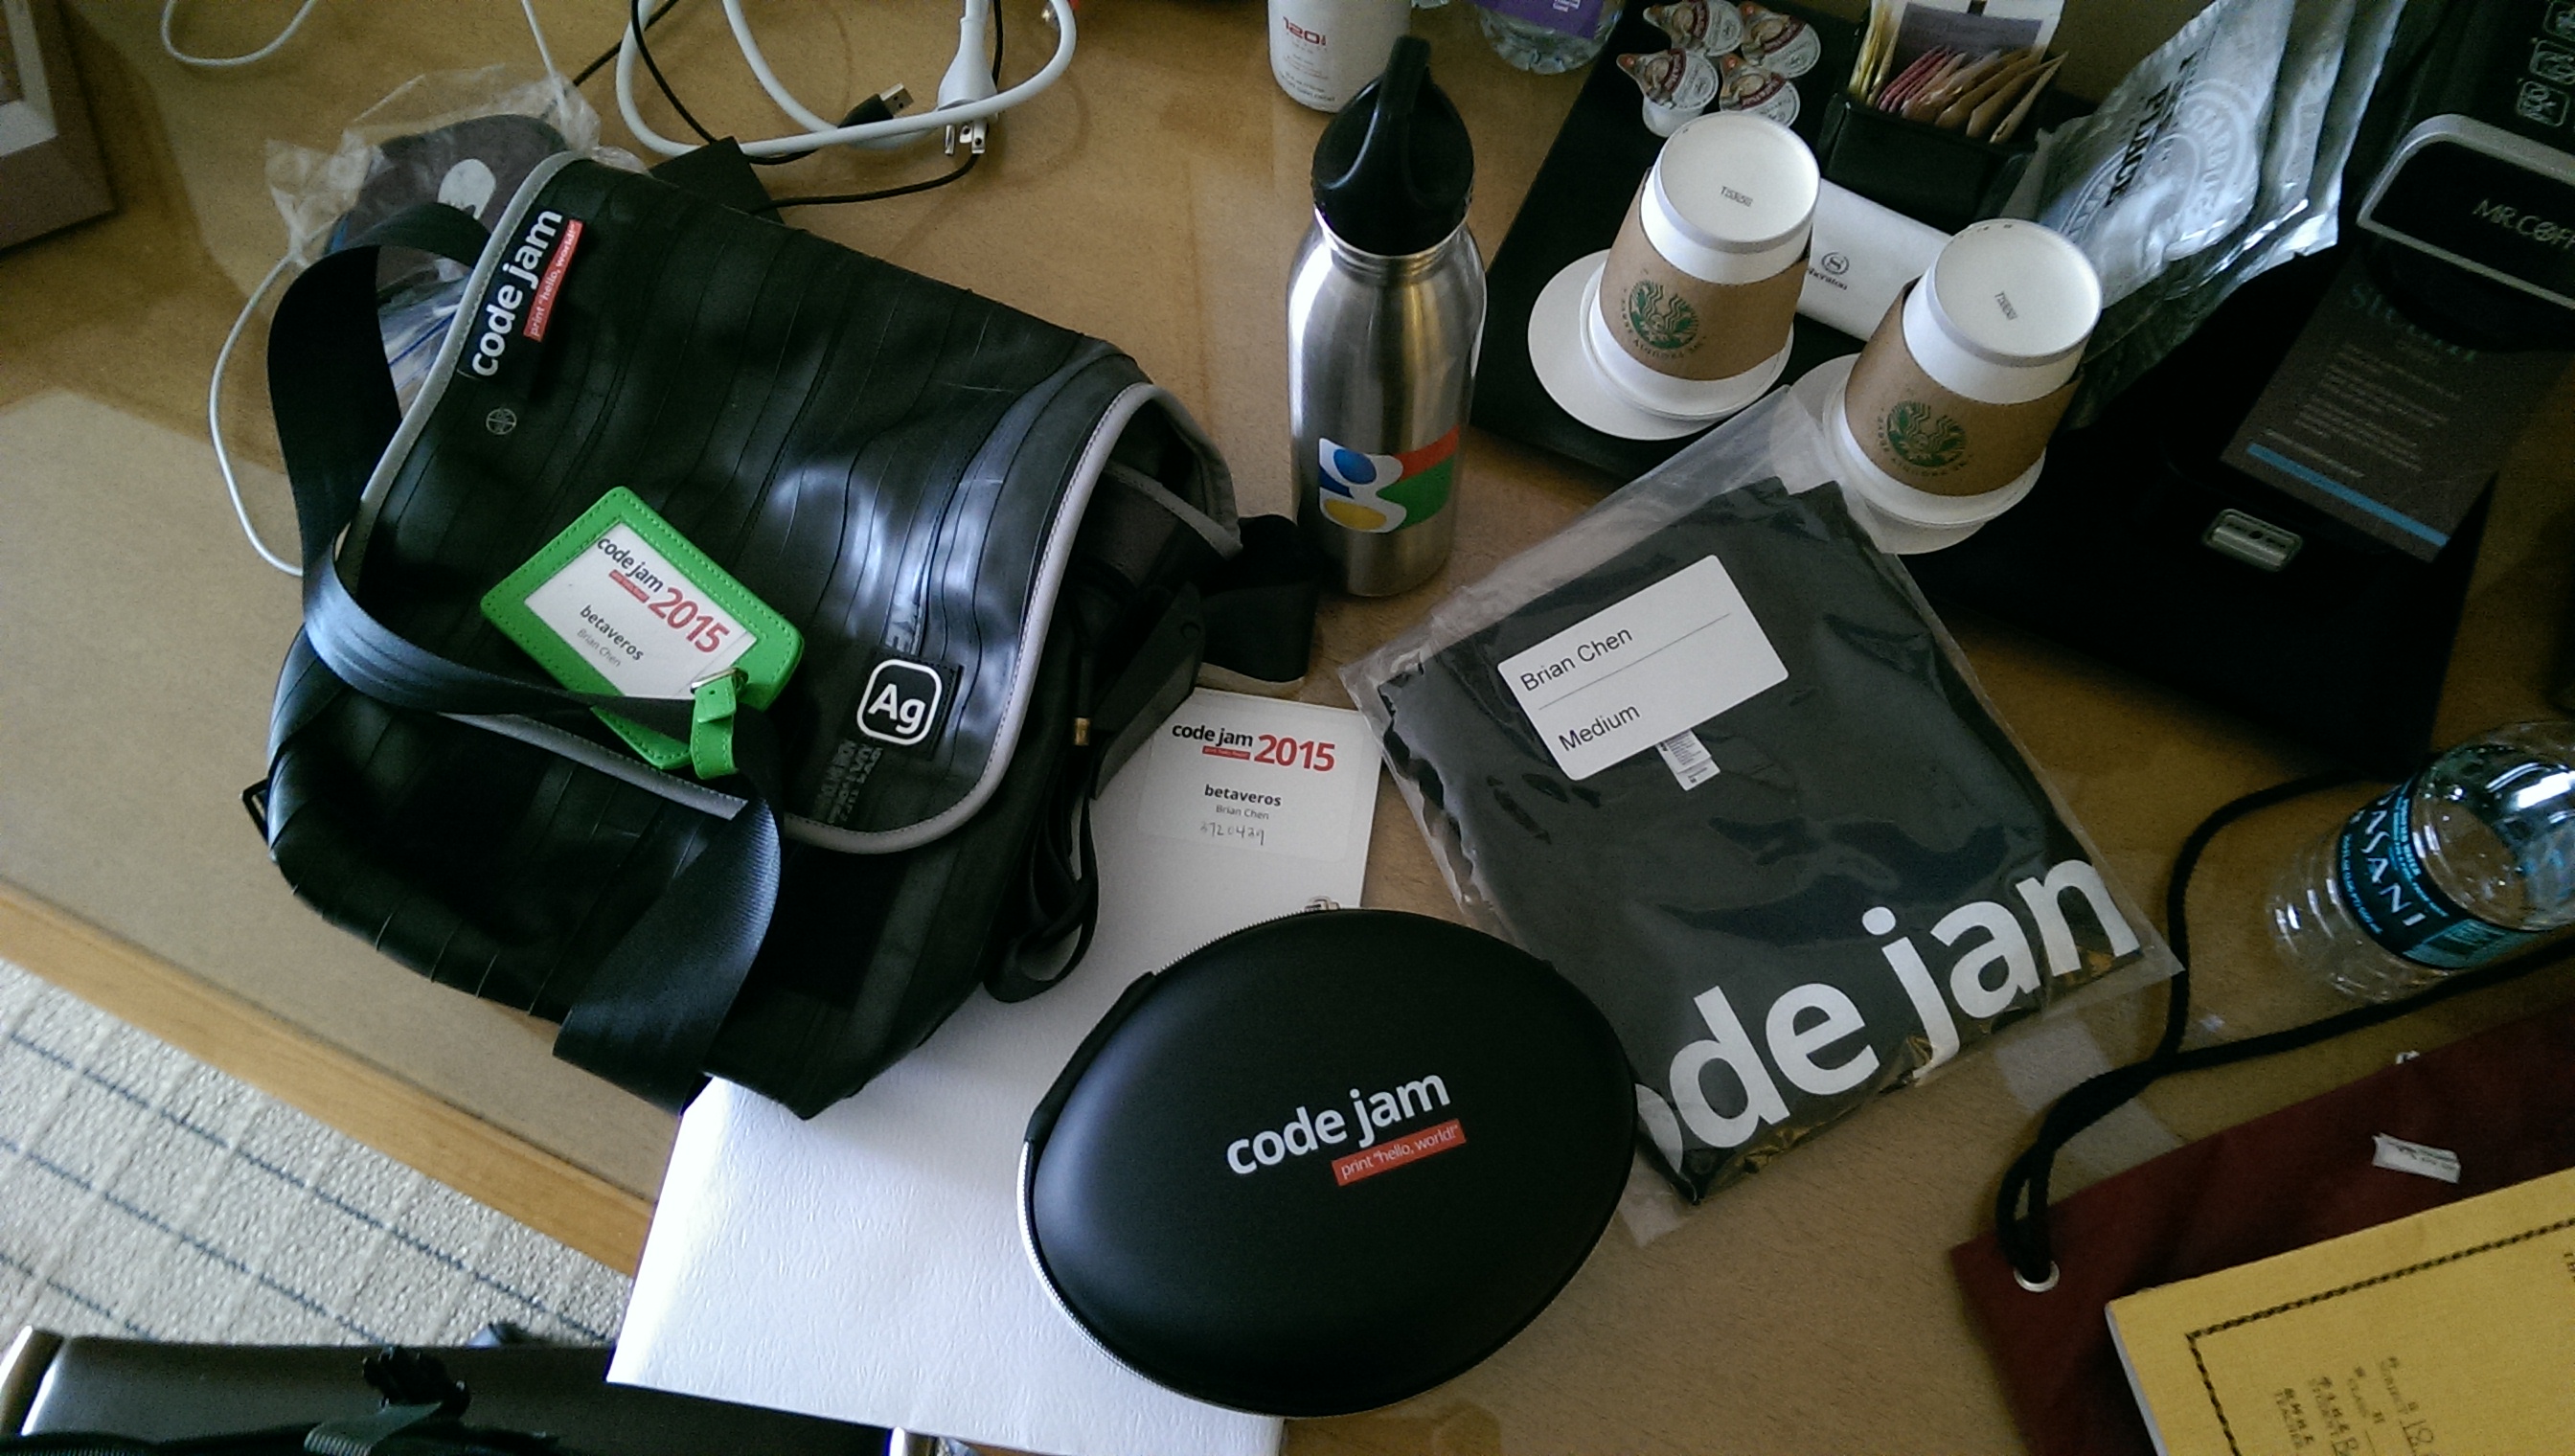 [Assorted goods from Google goodie bag]